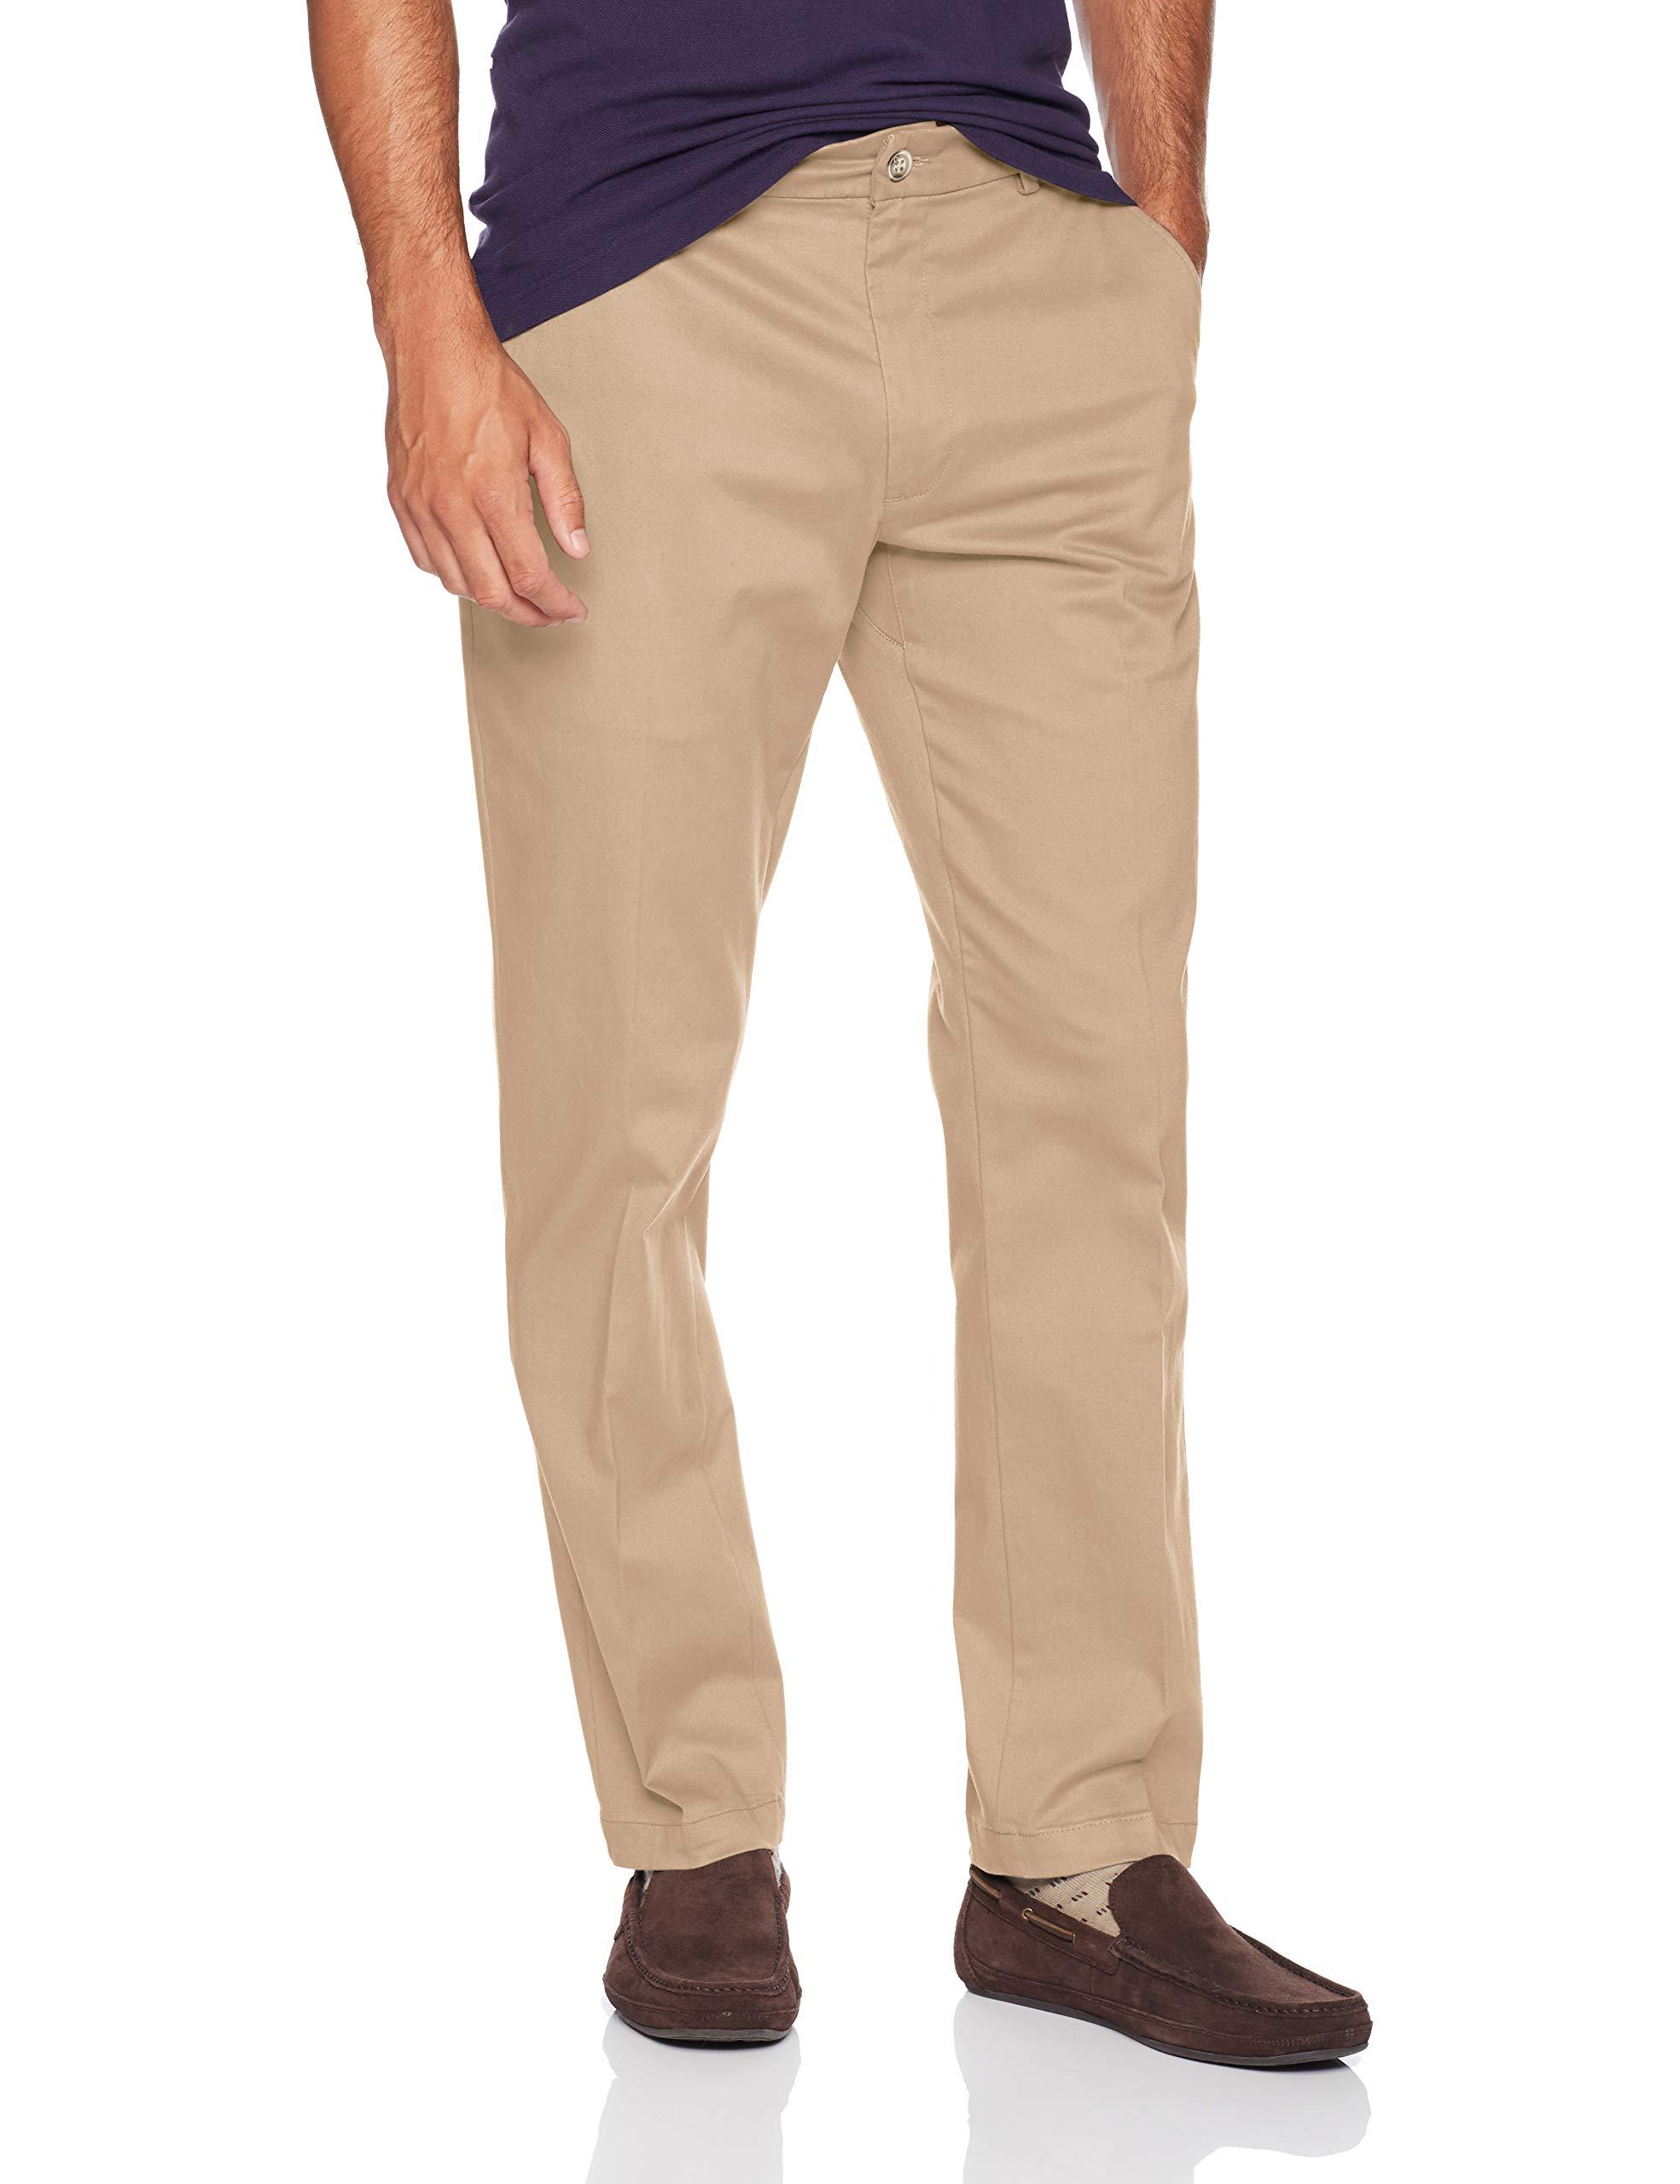 Lee Jeans Performance Series Tri-flex No Iron Relaxed Fit Pant in Khaki ...